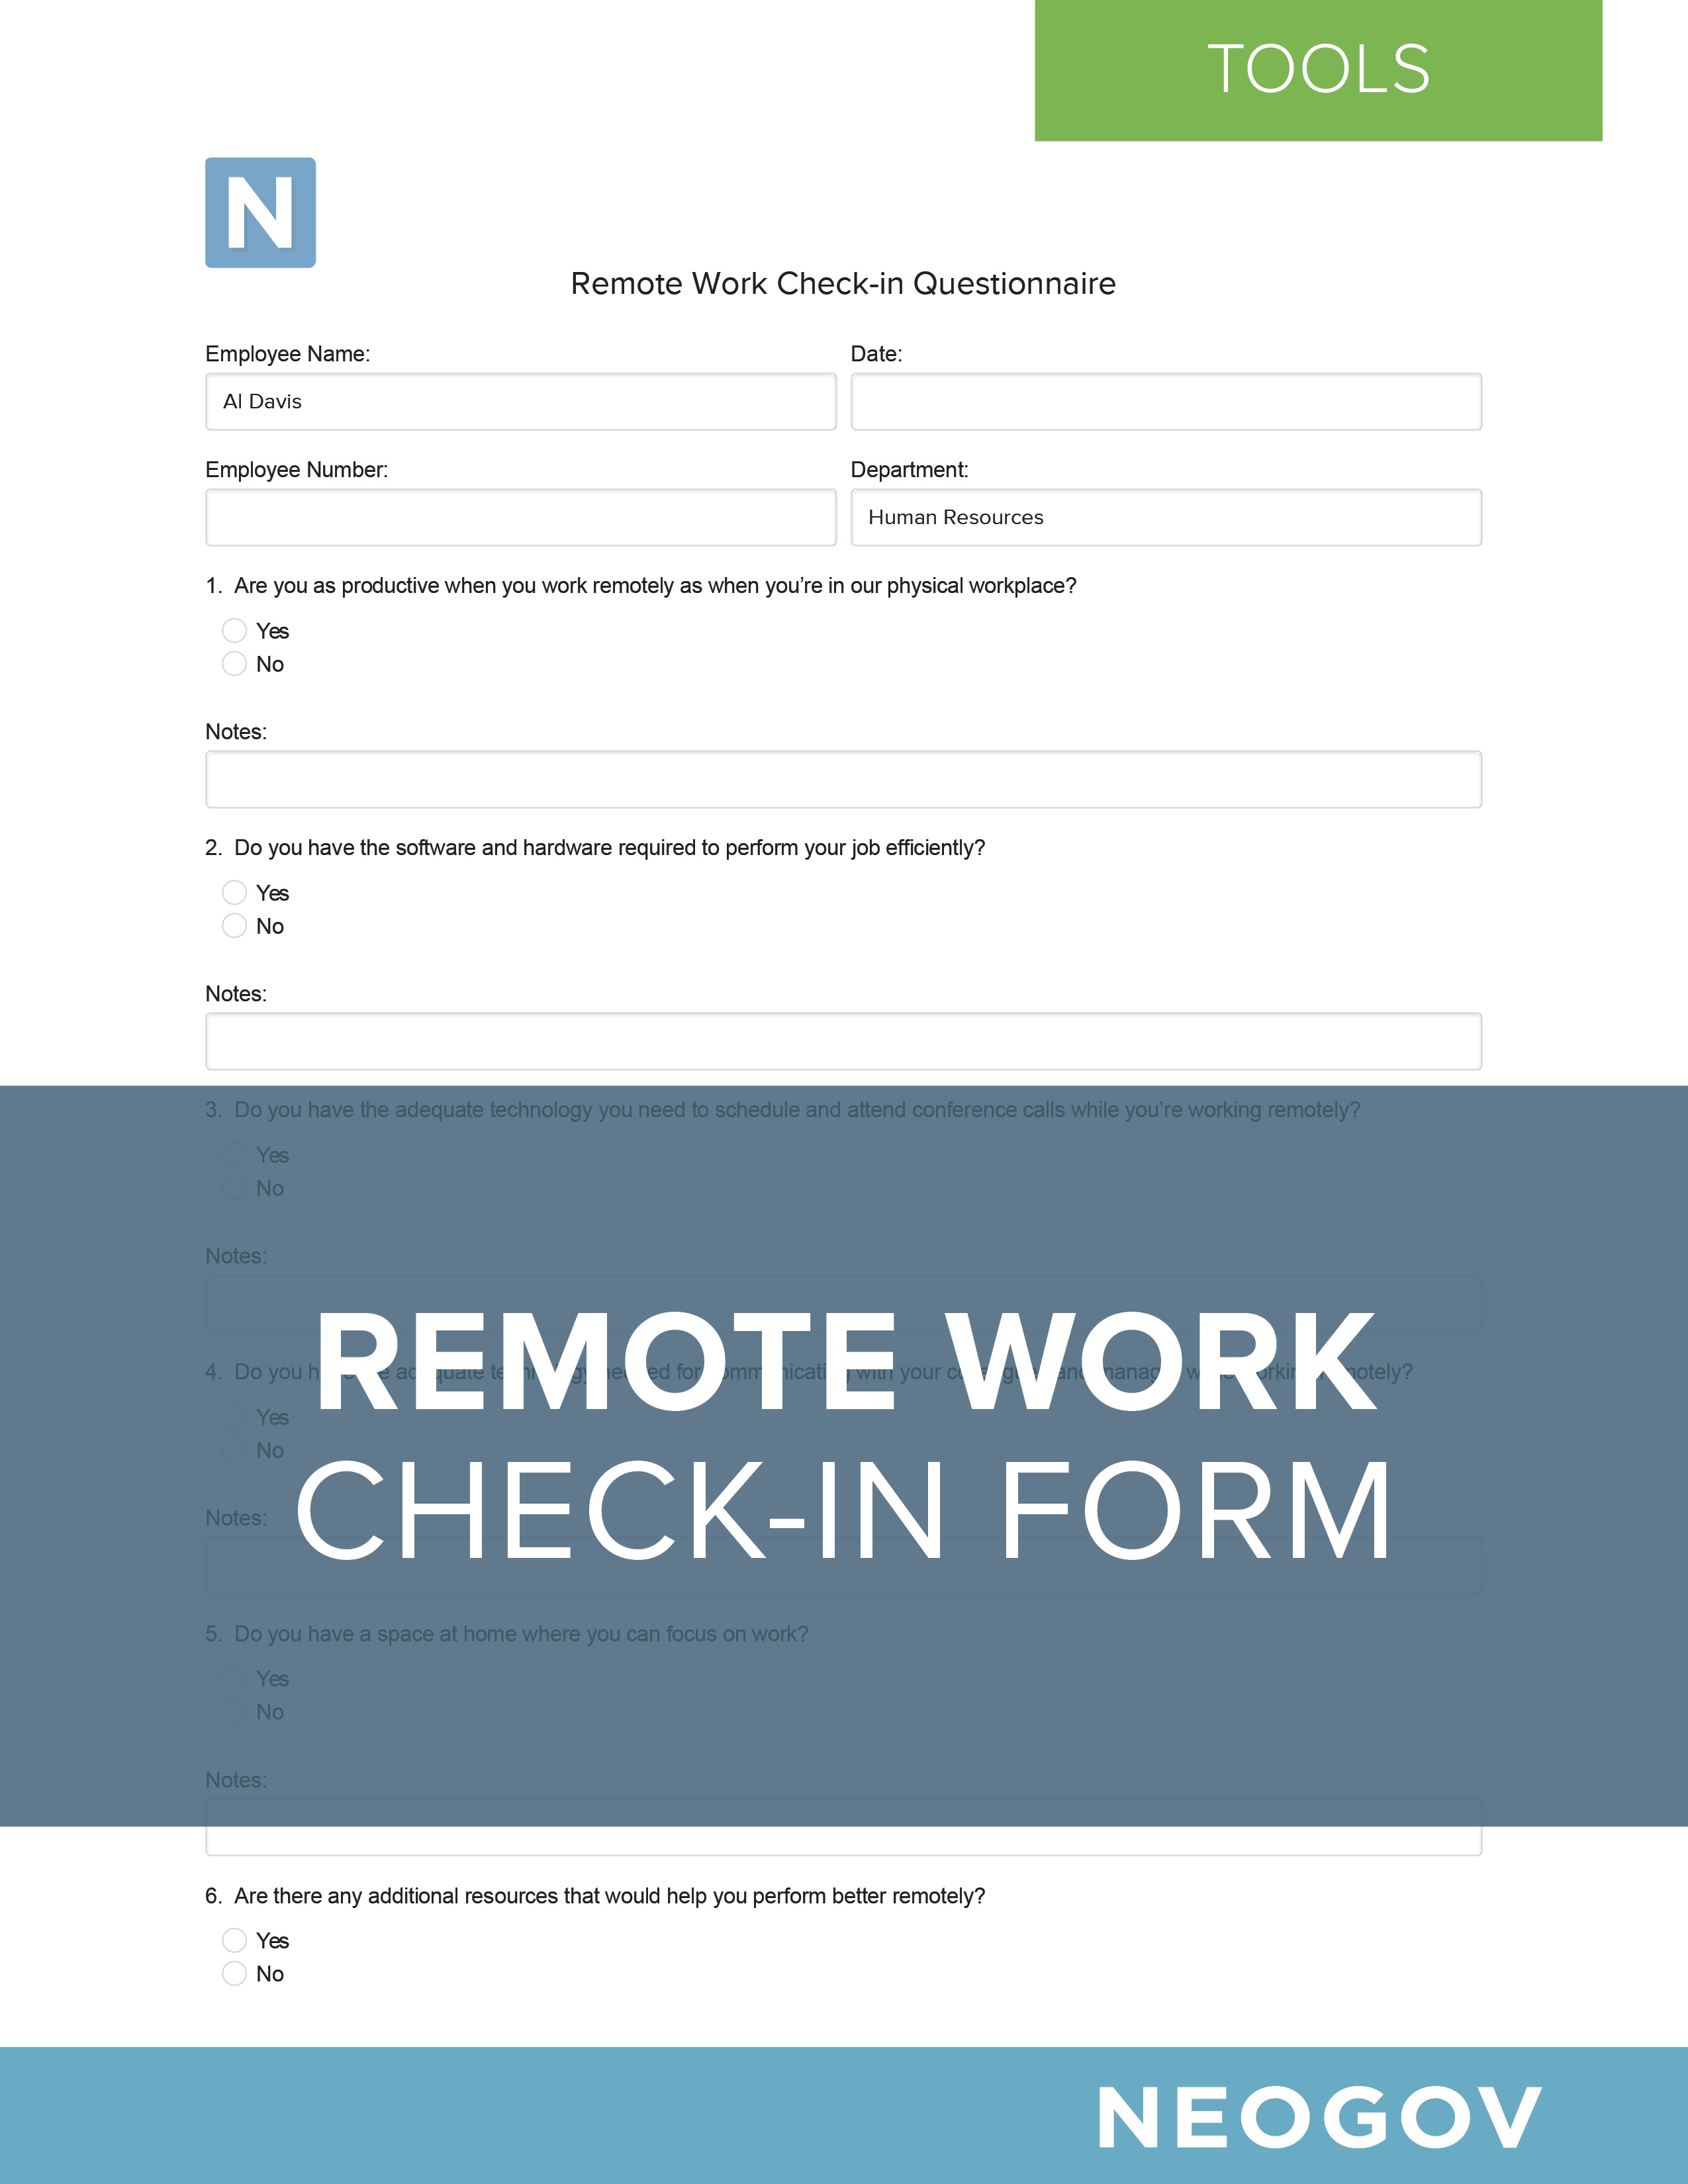 NGV-Remote-Work-Checkin-Form